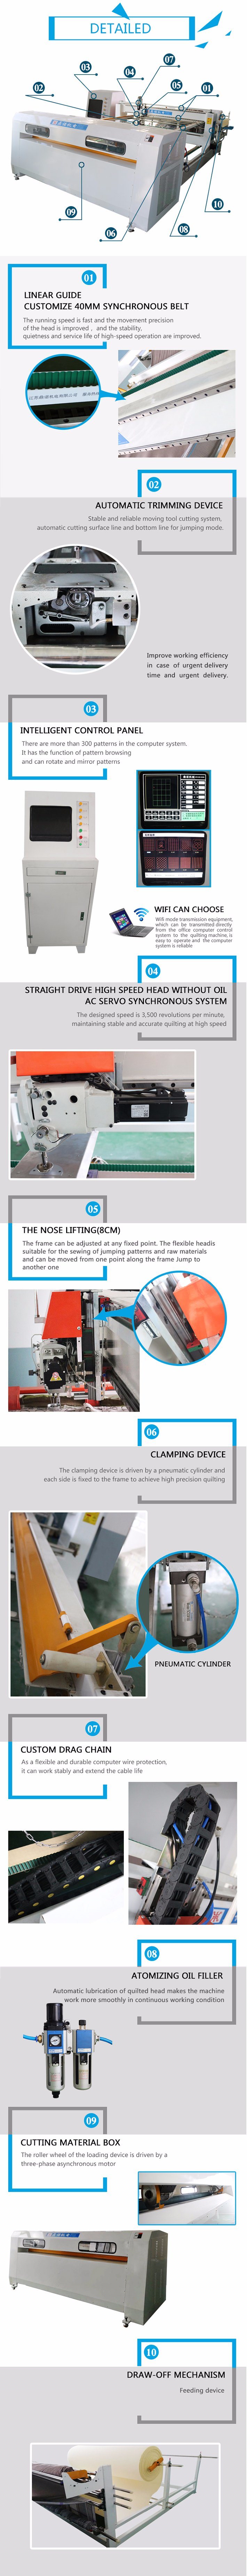 Dn-6 Fully Automatic and Computer Controlled Single-Needle Quilting Machine